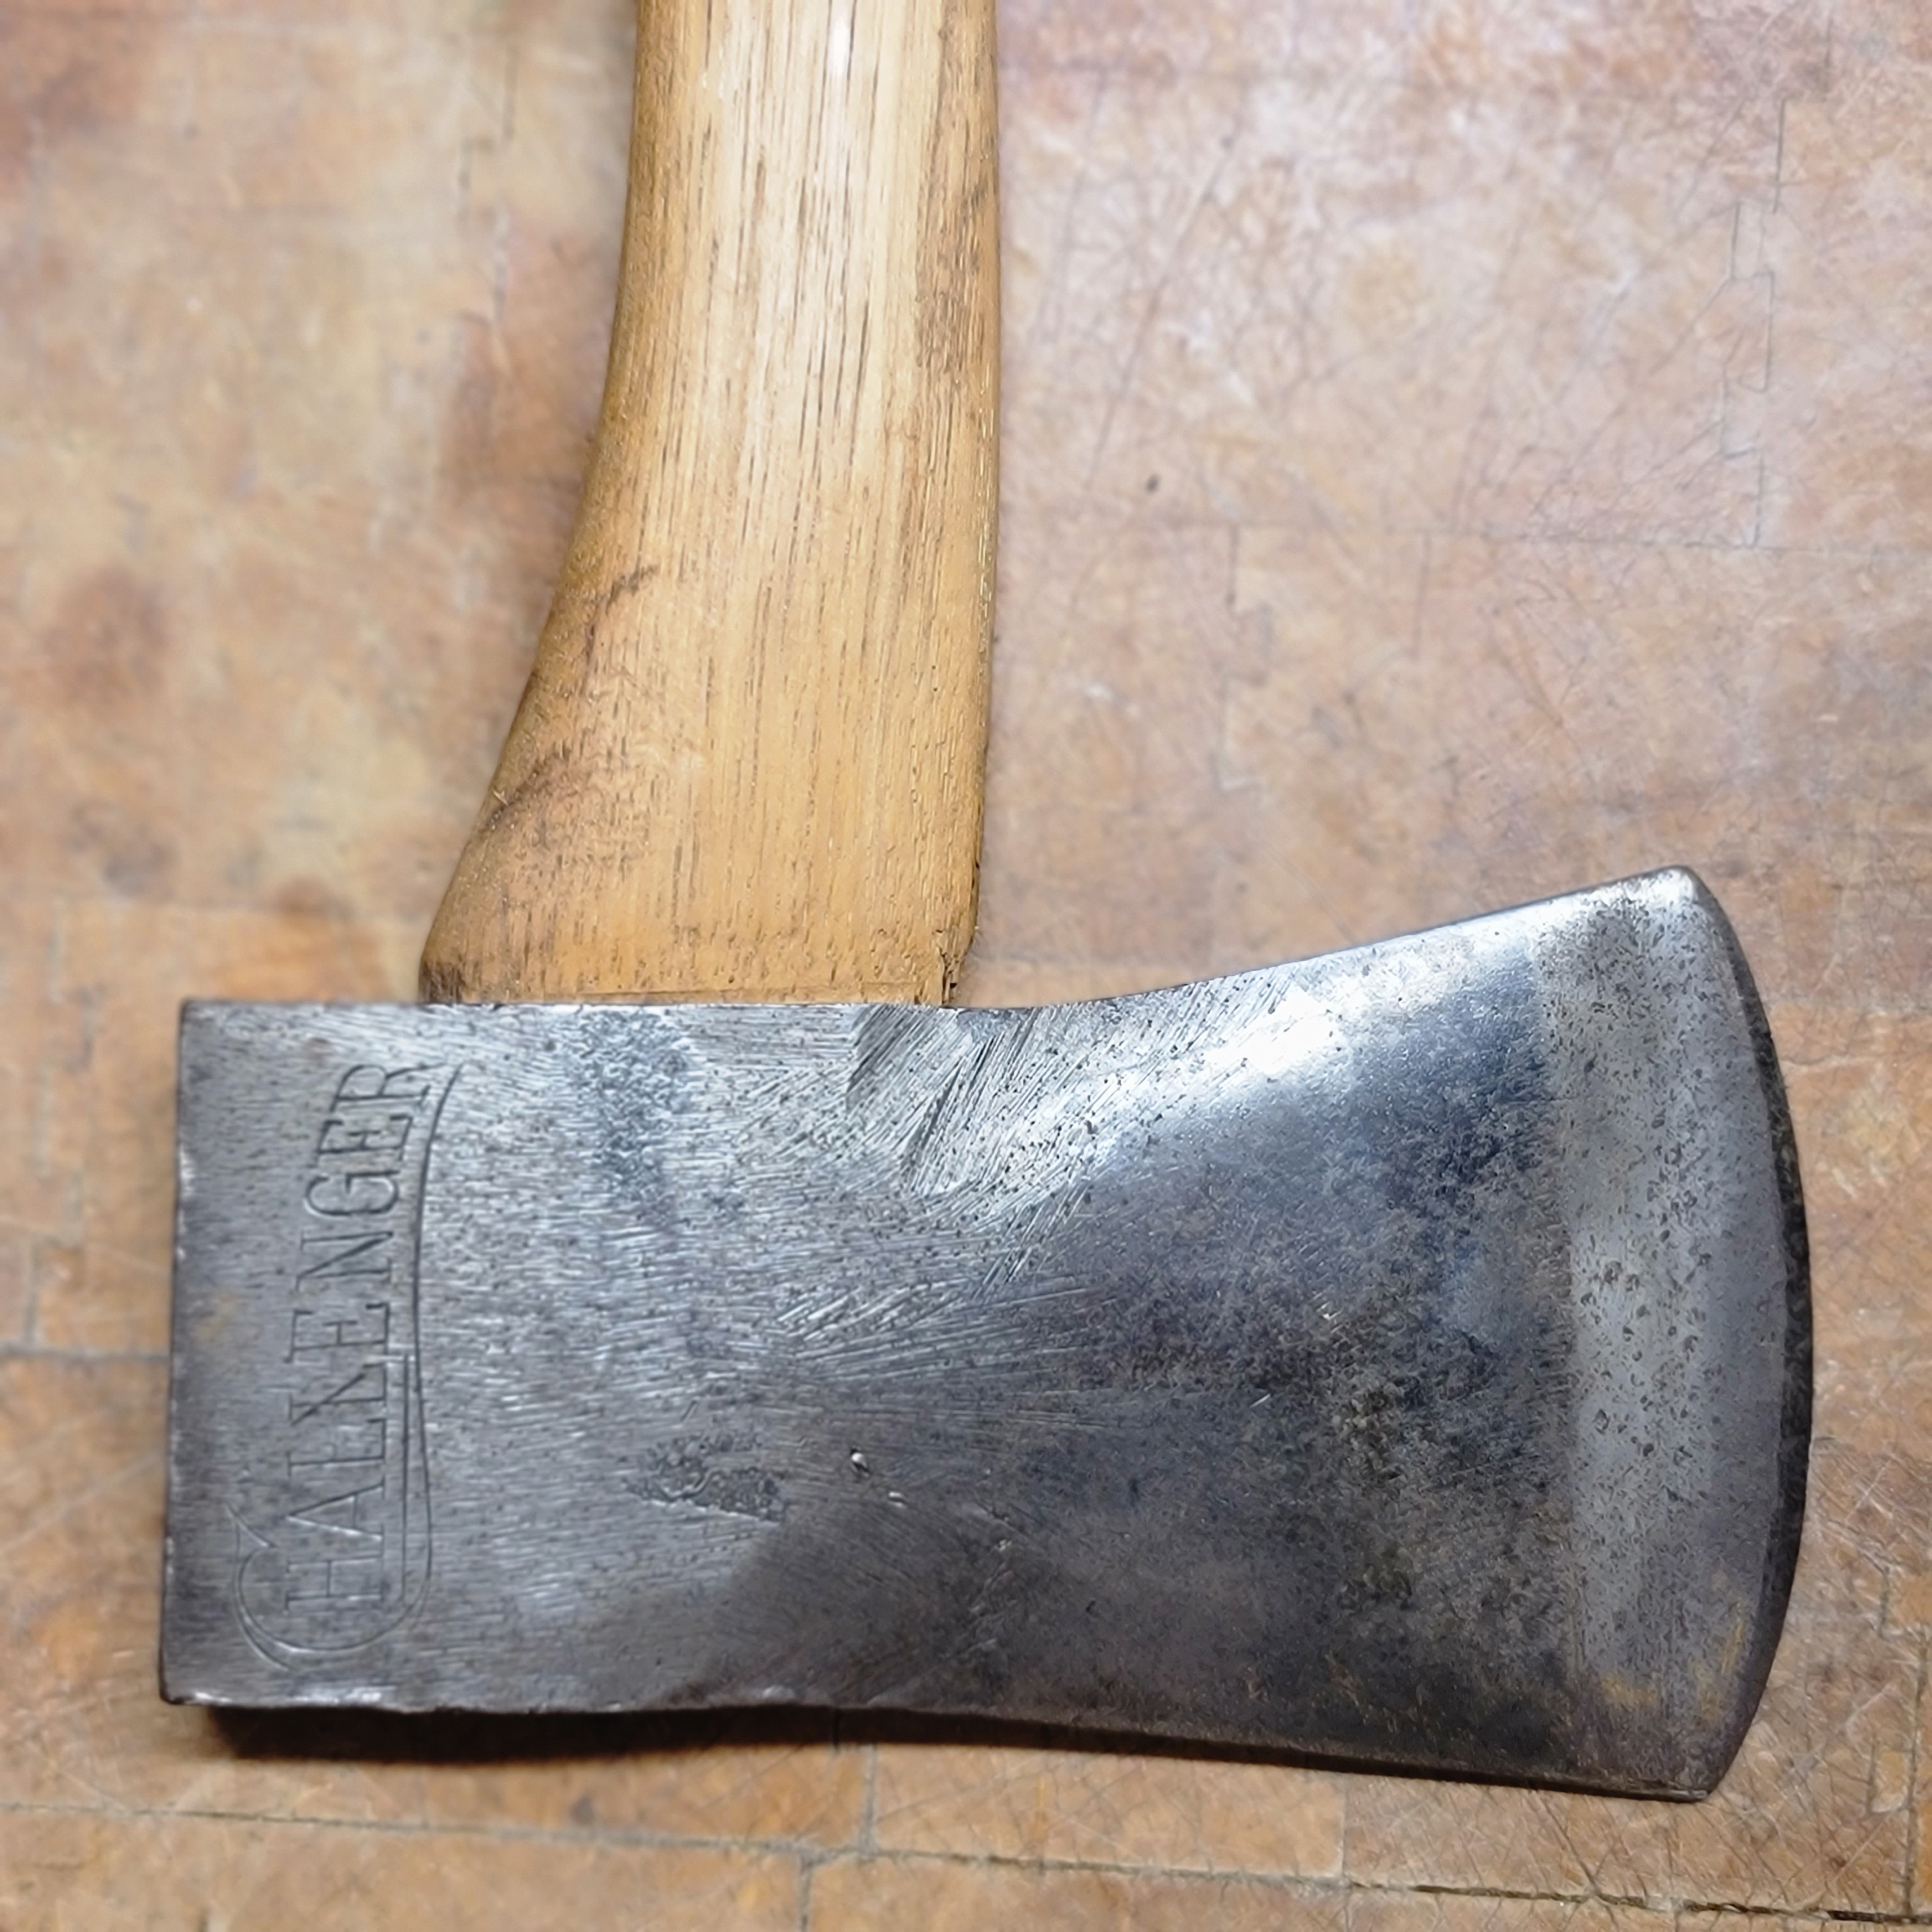 Vintage Axe Collector's Auction | Whiskey River Art & Trading Co.